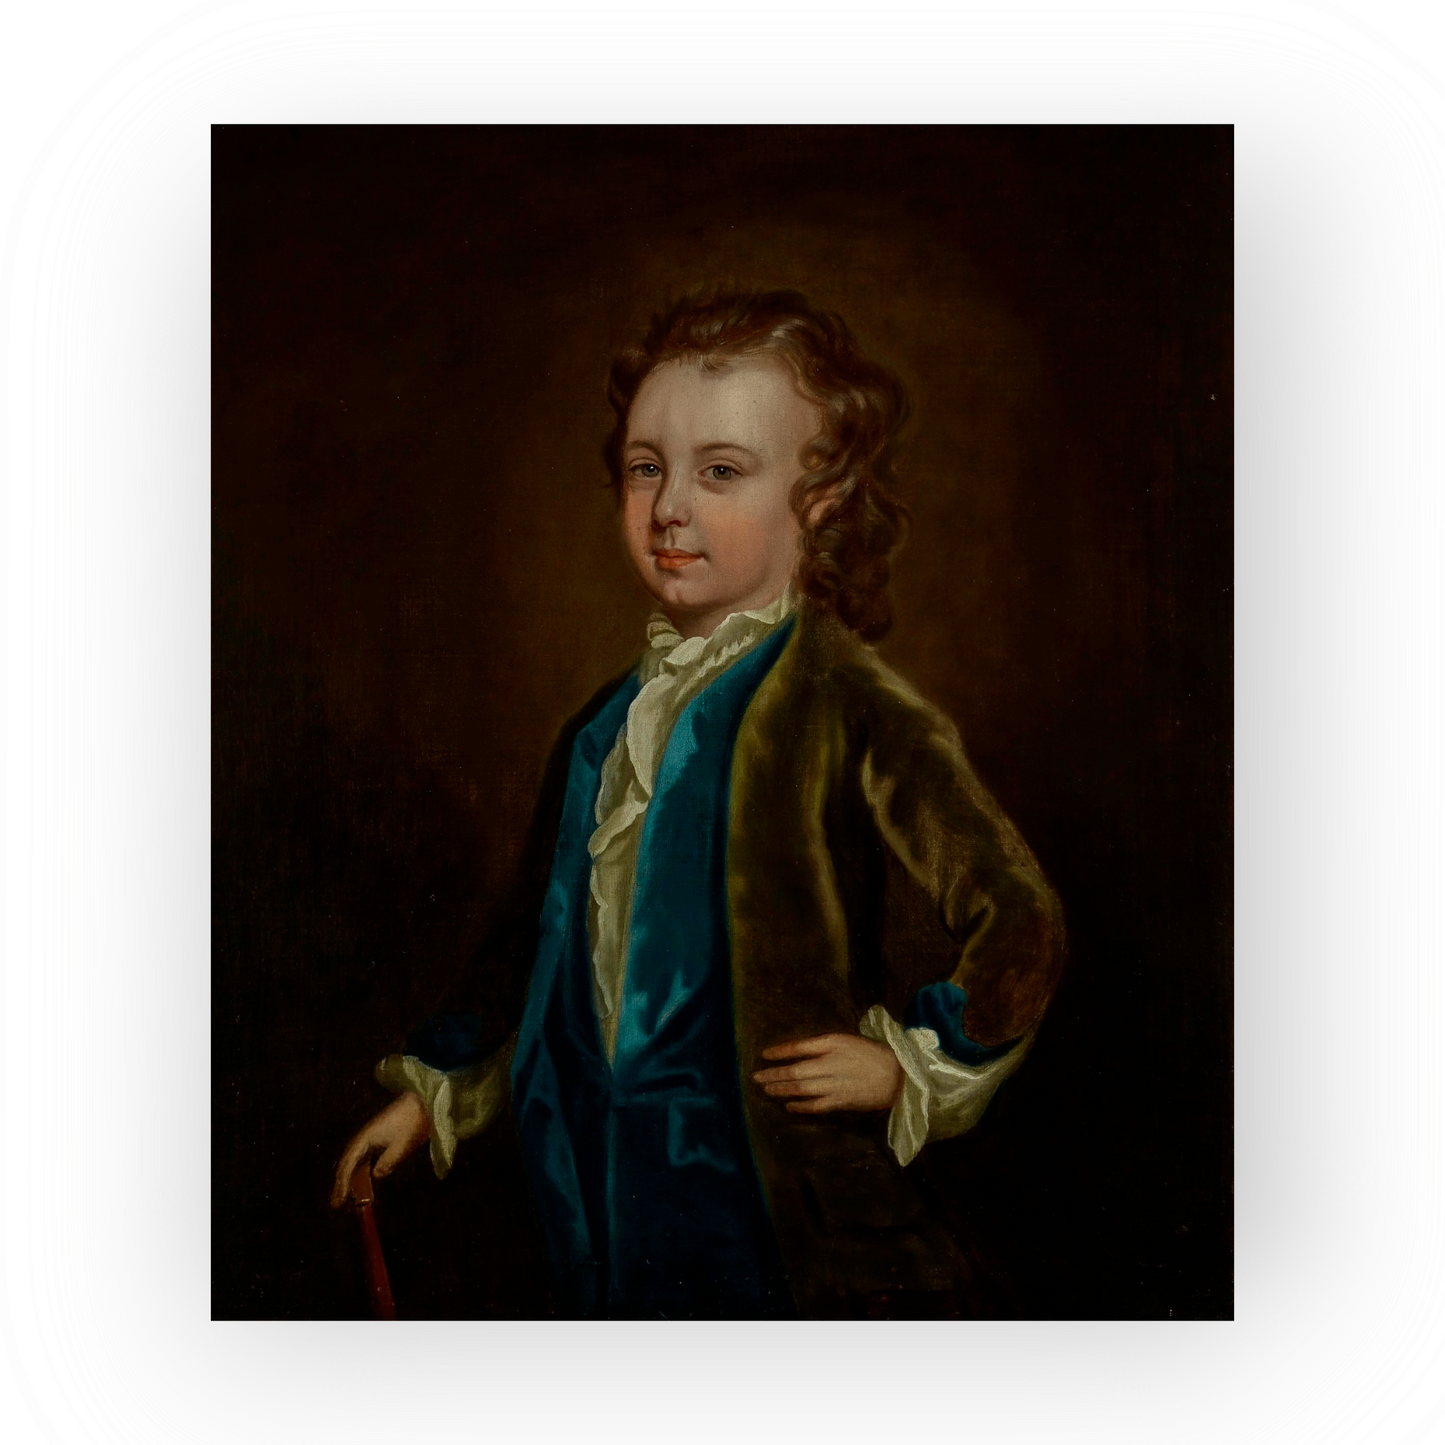 Circle of Thomas Hudson (1701-1779) - 18th Century English School Antique Oil On Canvas Portrait Painting Of A Young Boy